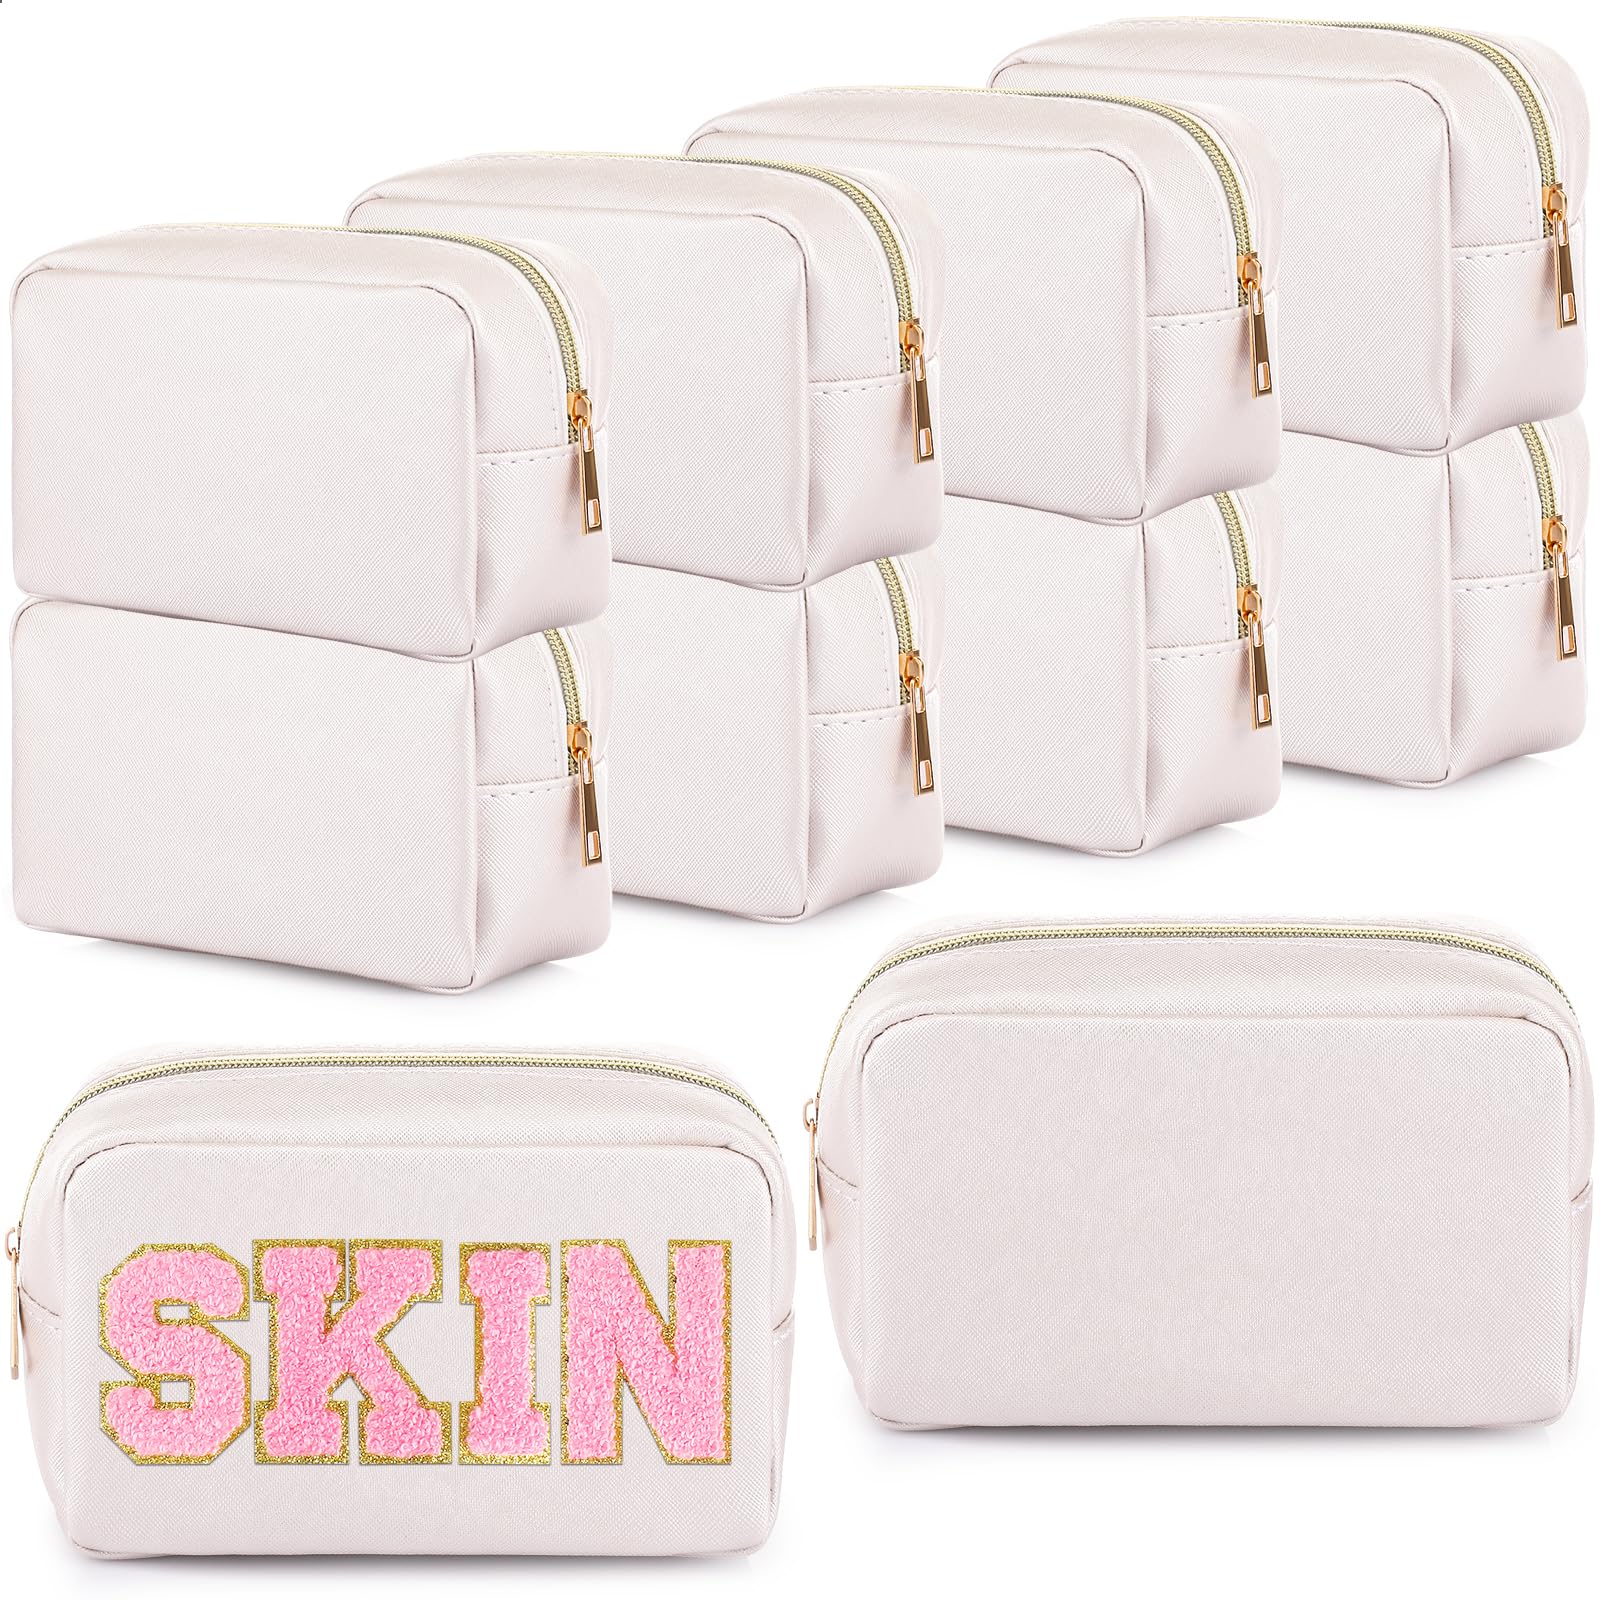 Silkfly 30 Pcs Cotton Canvas Makeup Bags Canvas Cosmetic Bag with Zipper  Two Tone Make up Bags Bulk with Bottom Blank DIY Pouches Bags Multi Purpose